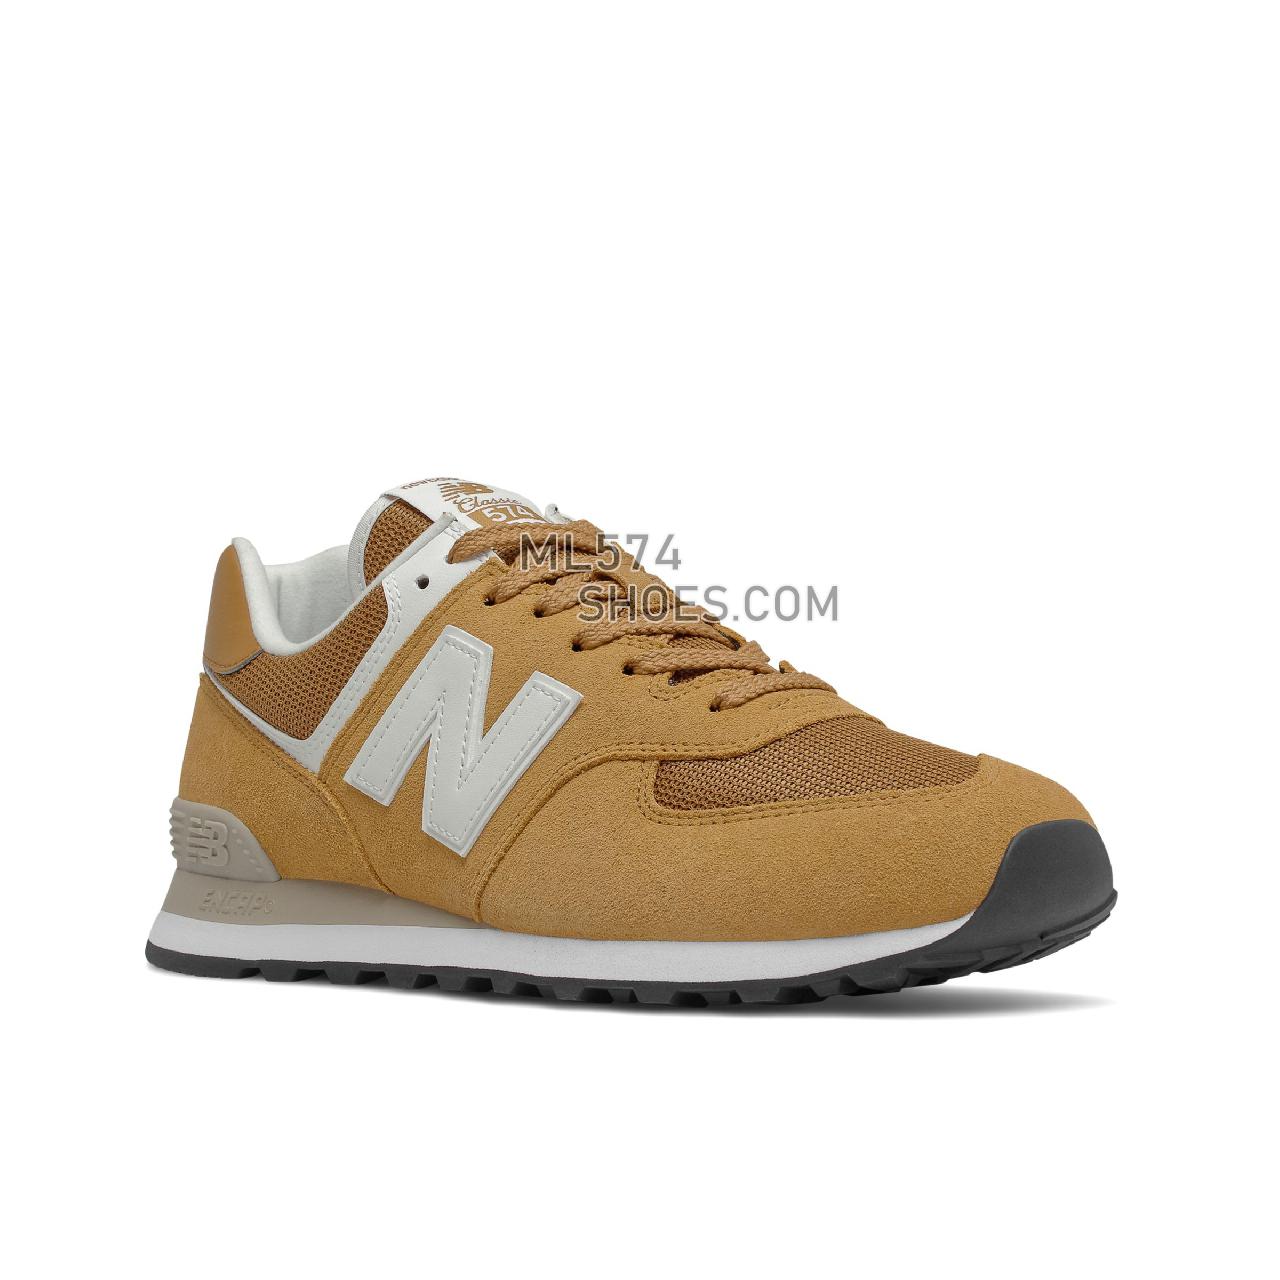 New Balance 574v2 - Men's Classic Sneakers - Workwear with White - ML574RP2